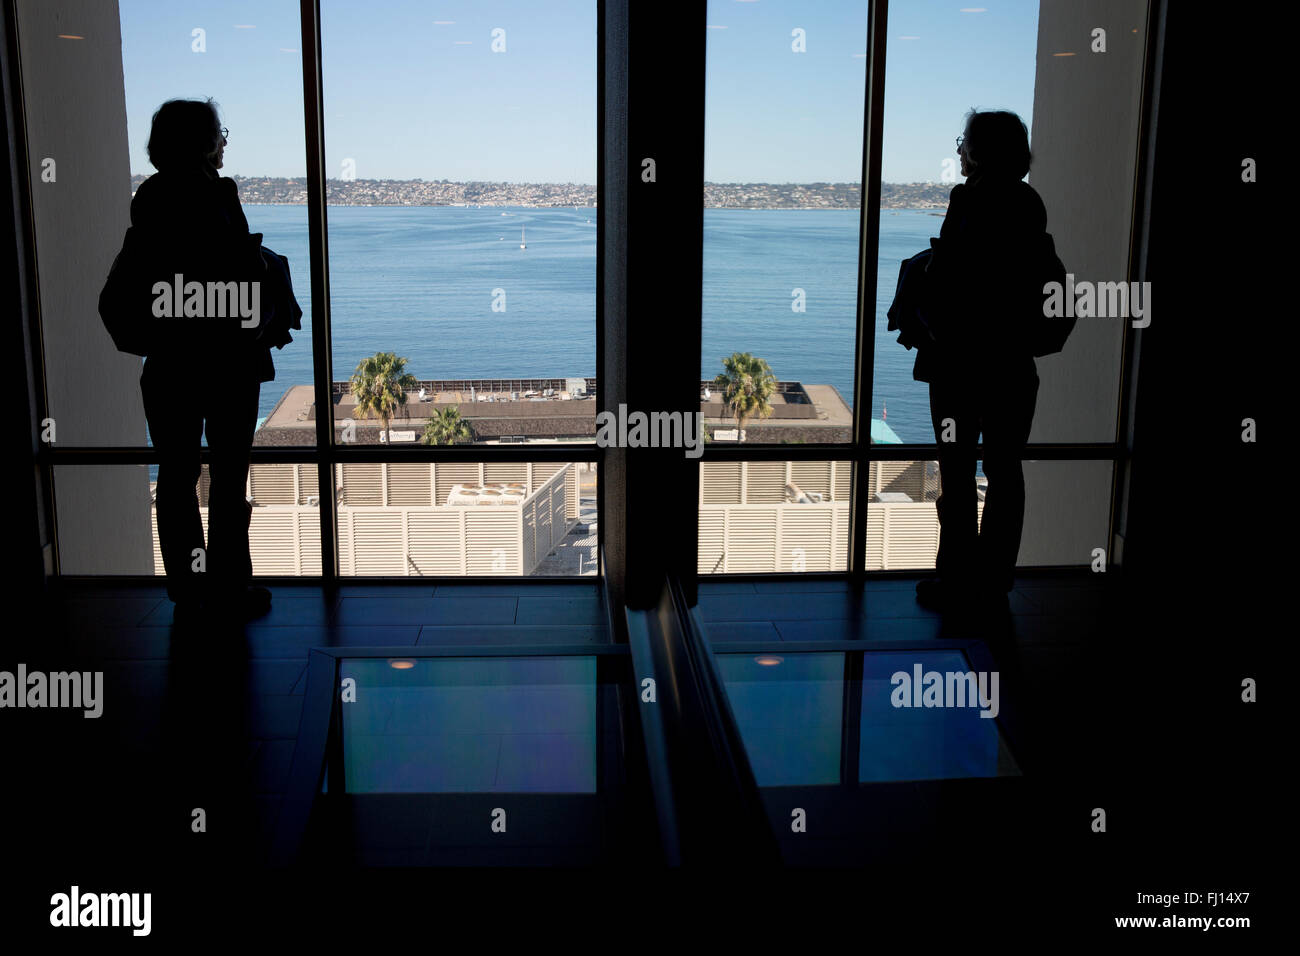 Woman reflected in mirror looking out window of Windham Hotel on San Diego Bay Stock Photo